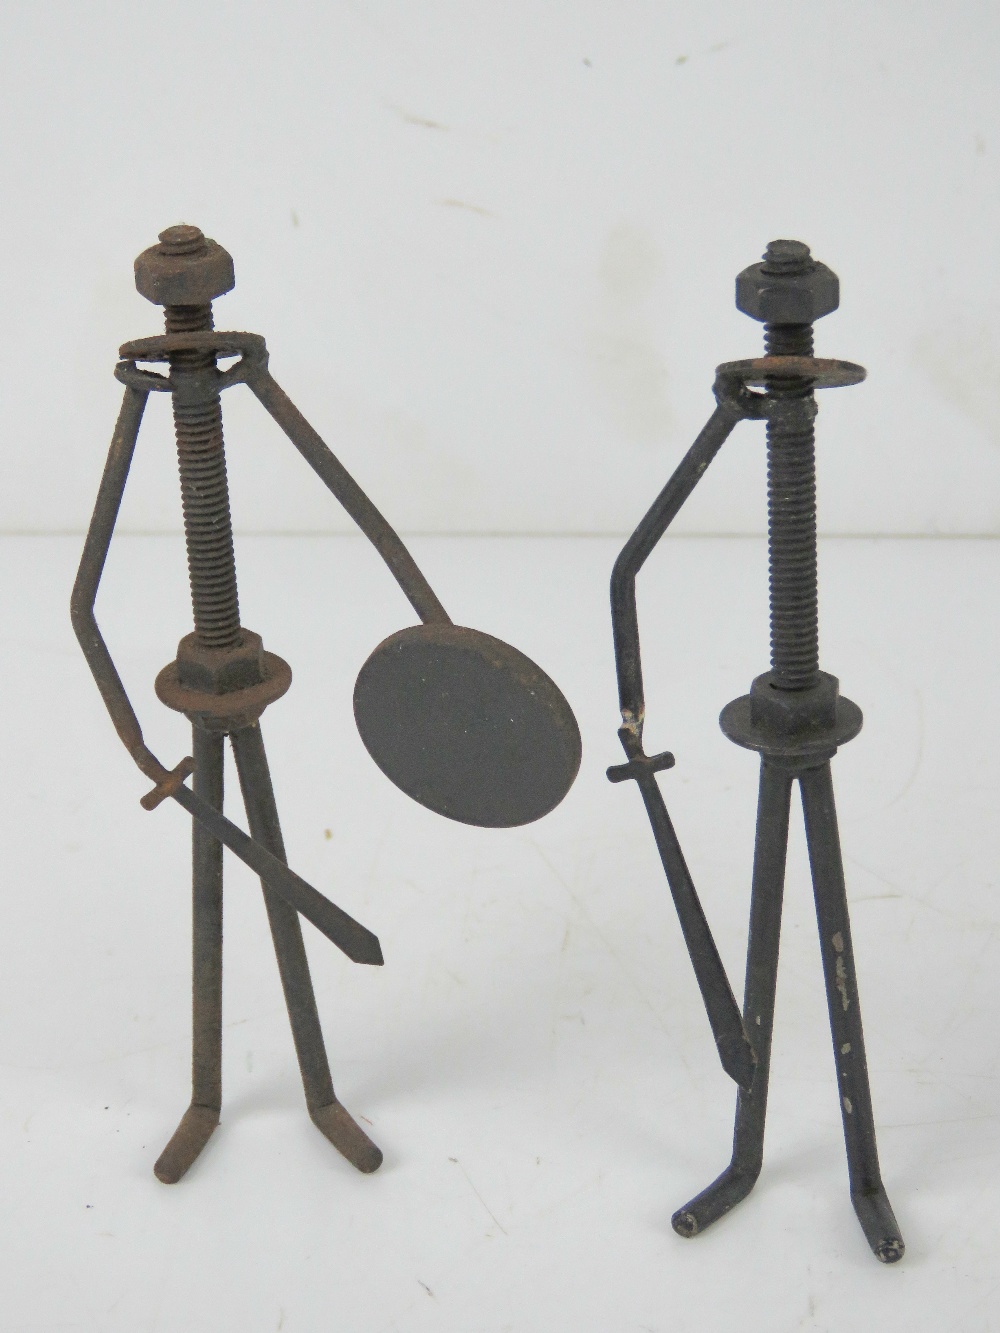 A quantity of hand made figurines using nuts, bolts, nails, etc, tallest 14cm high. Seven items. - Image 2 of 3